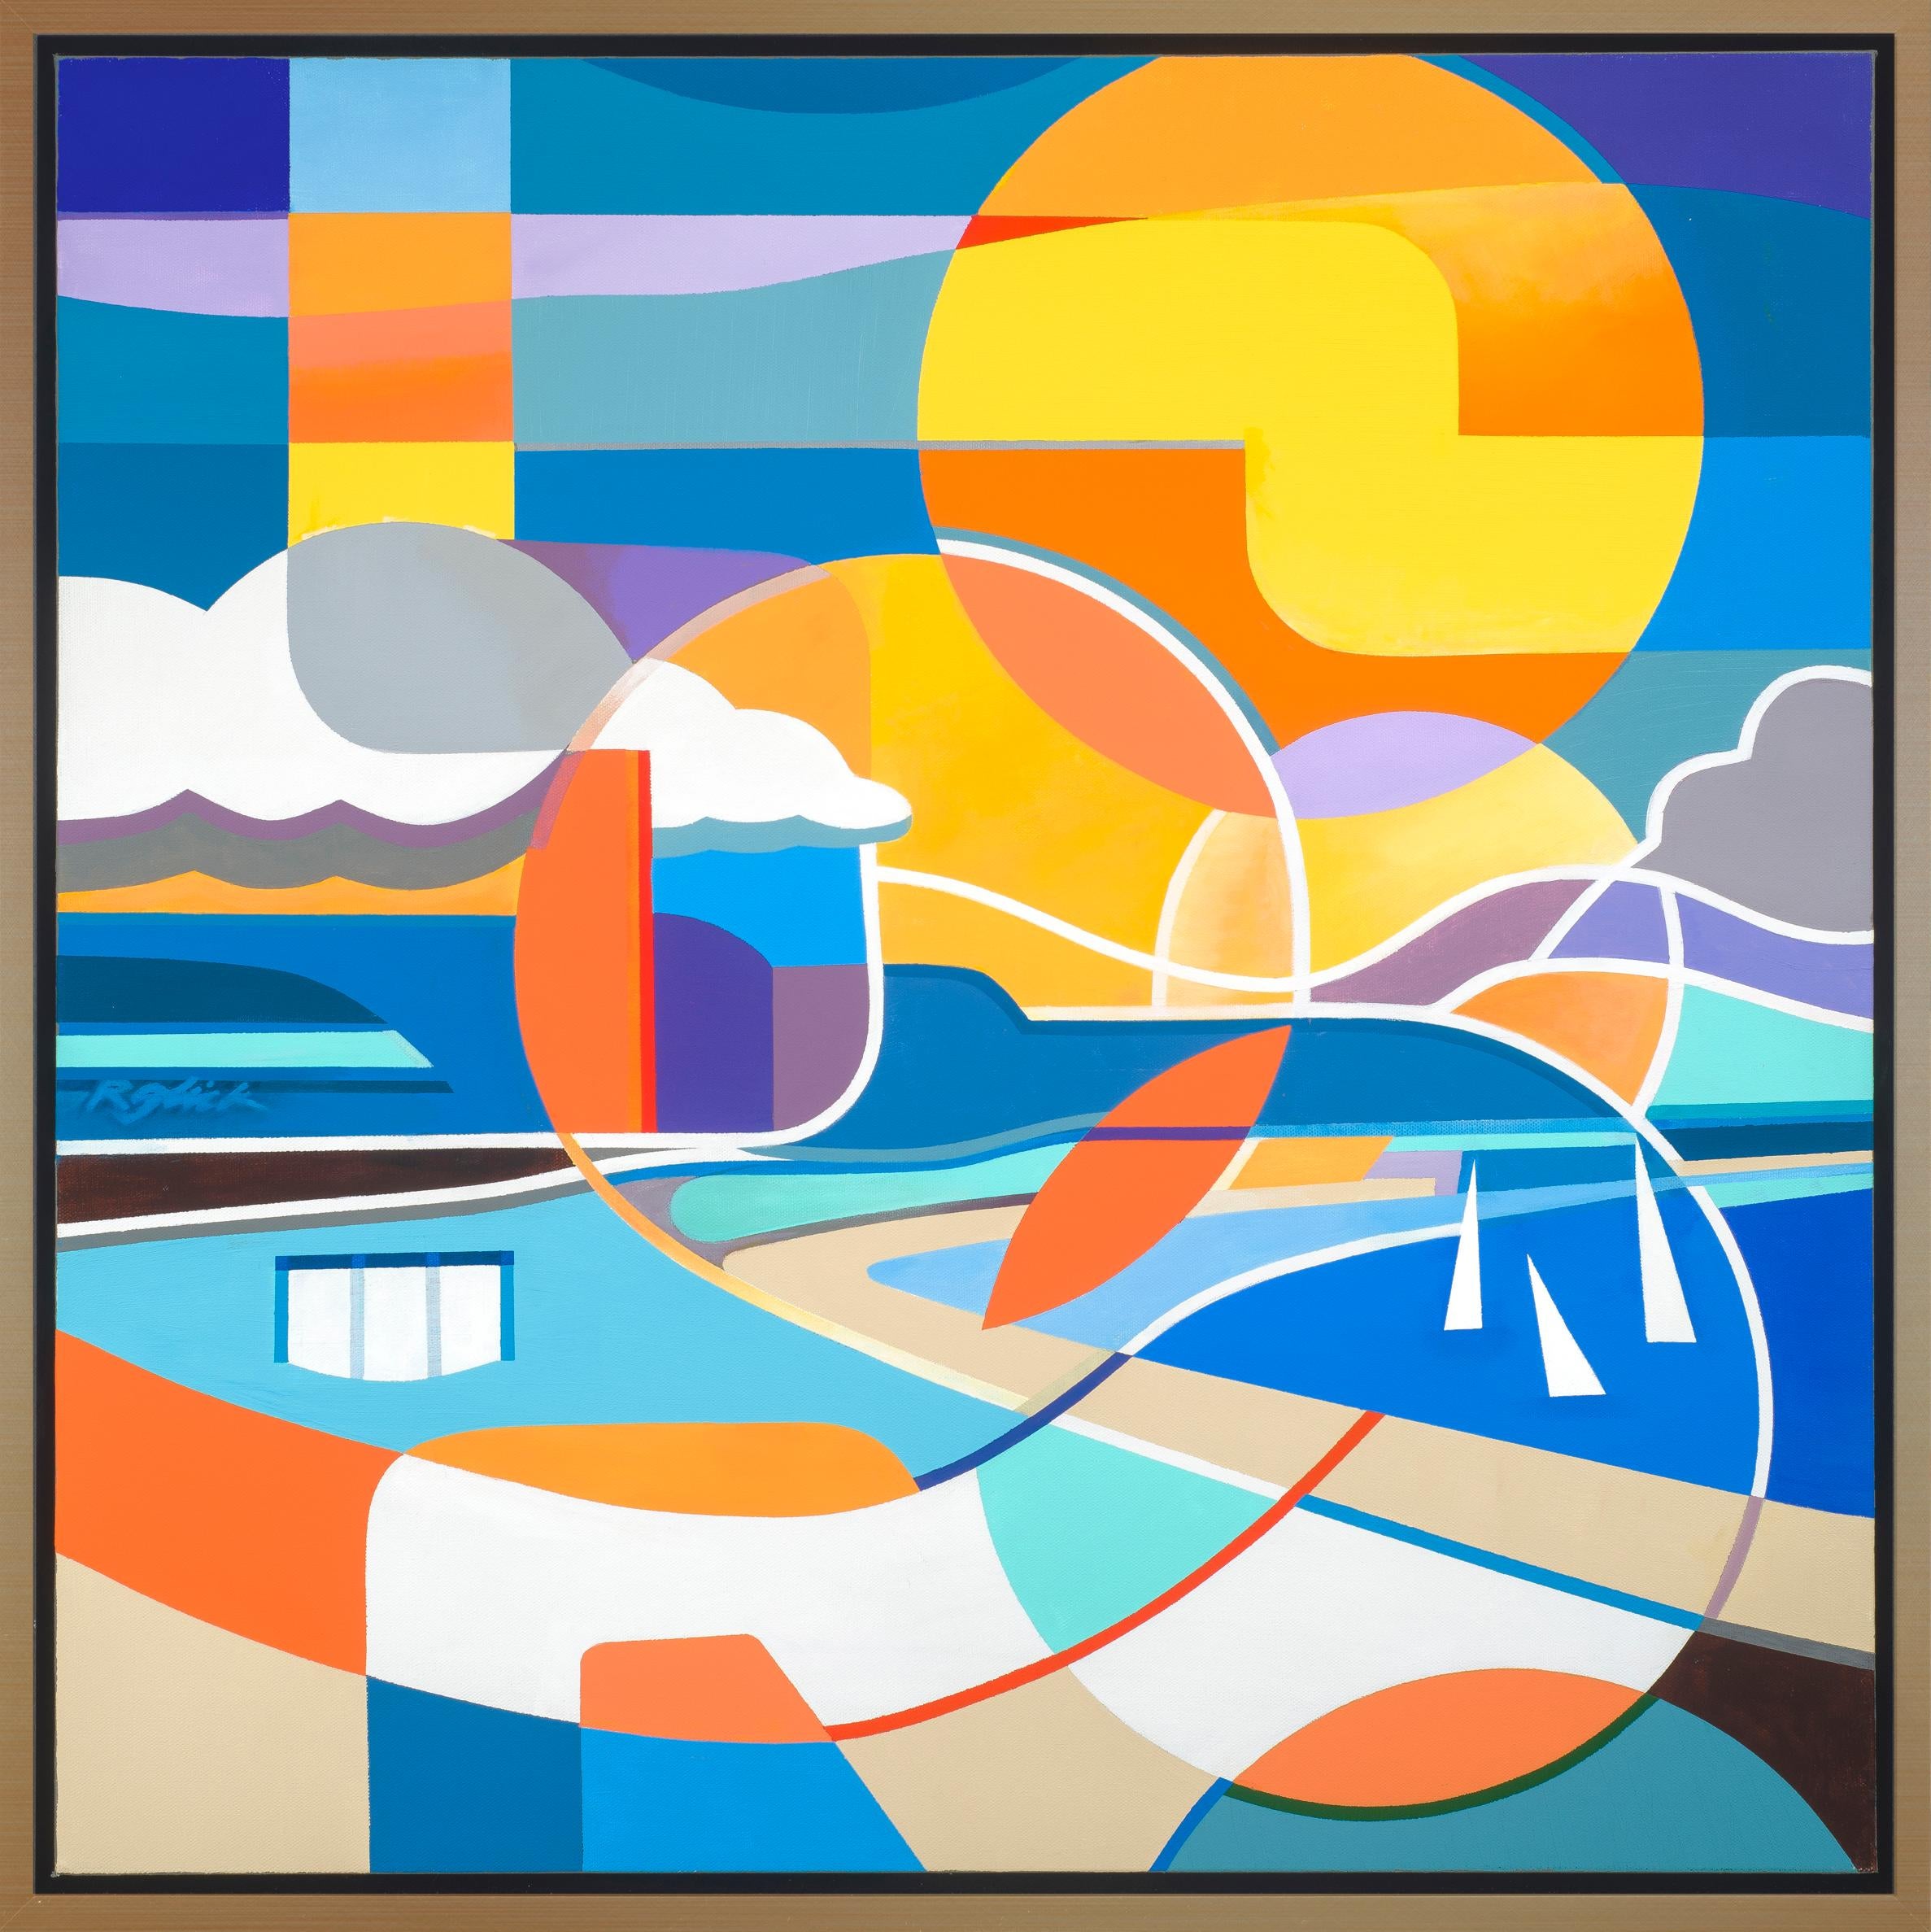 Robert Glick Abstract Painting - 'Day at the Coast' - Shoreline Series - Abstract Geometric Seascape and Boats